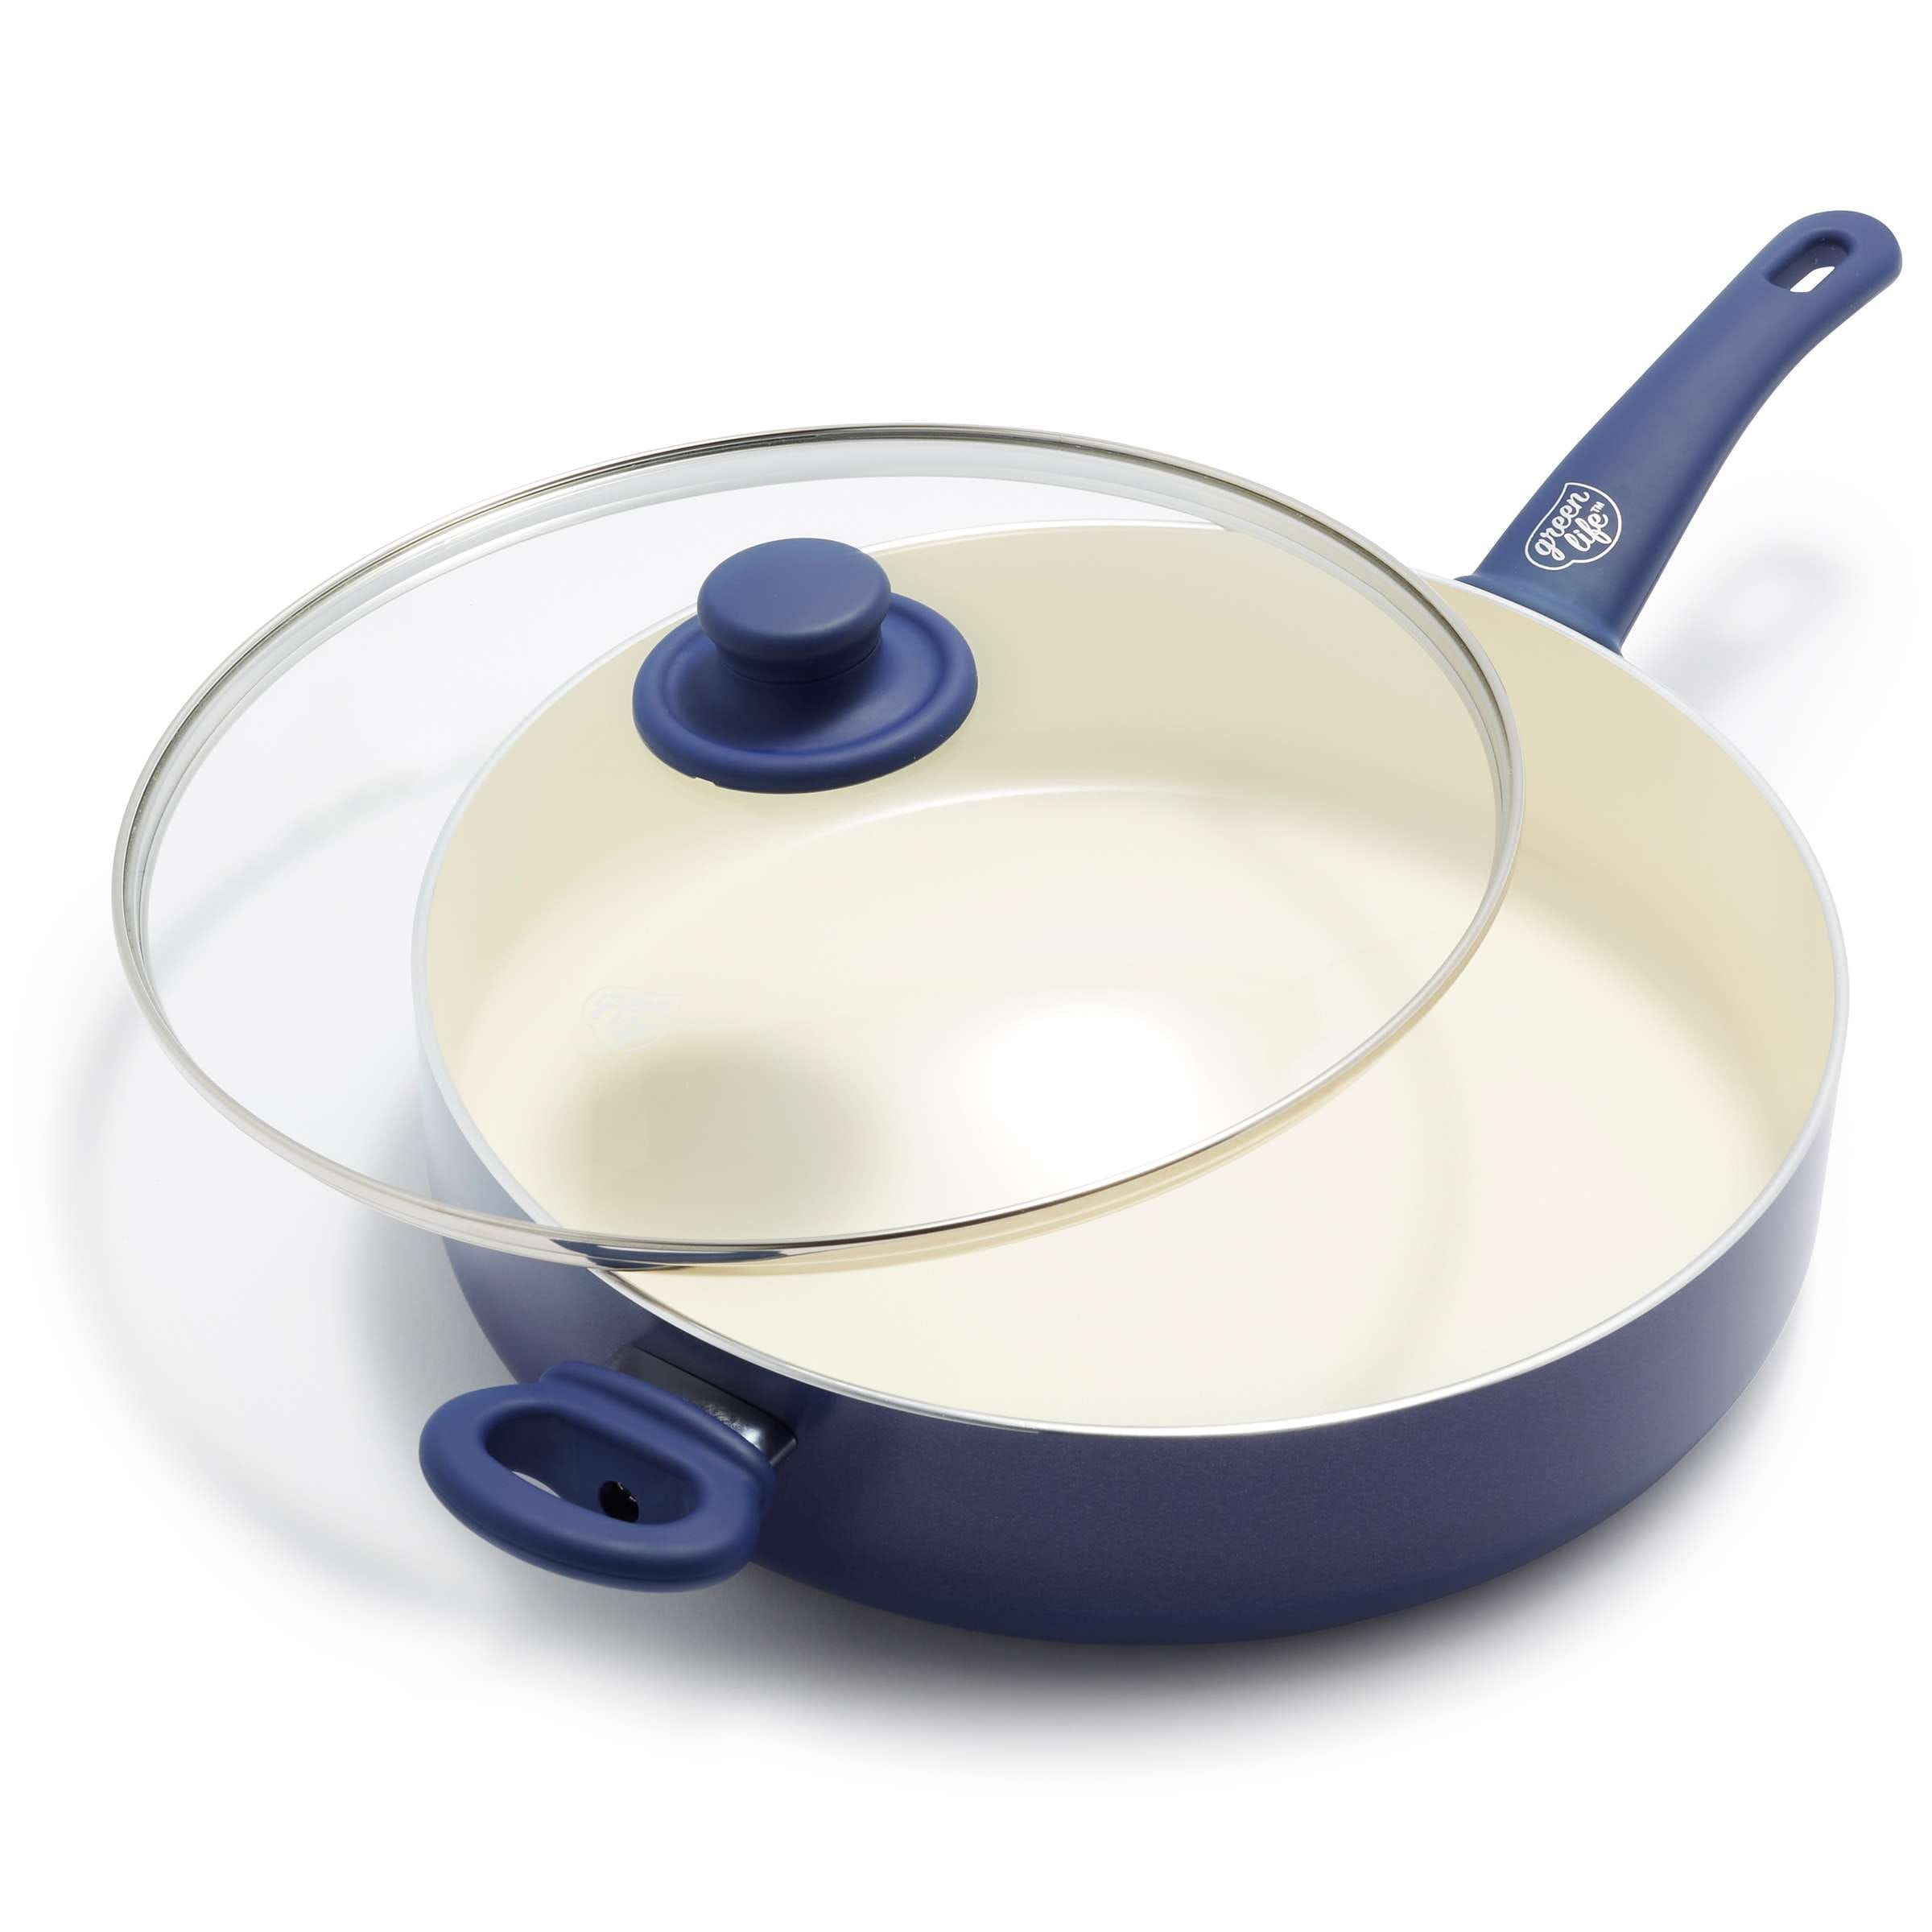 https://ak1.ostkcdn.com/images/products/is/images/direct/1e9386a2a35c209dacf1bf1c213ffcaf164efb78/GreenLife-Soft-Grip-5Qt-Saute-Pan-w--Lid.jpg